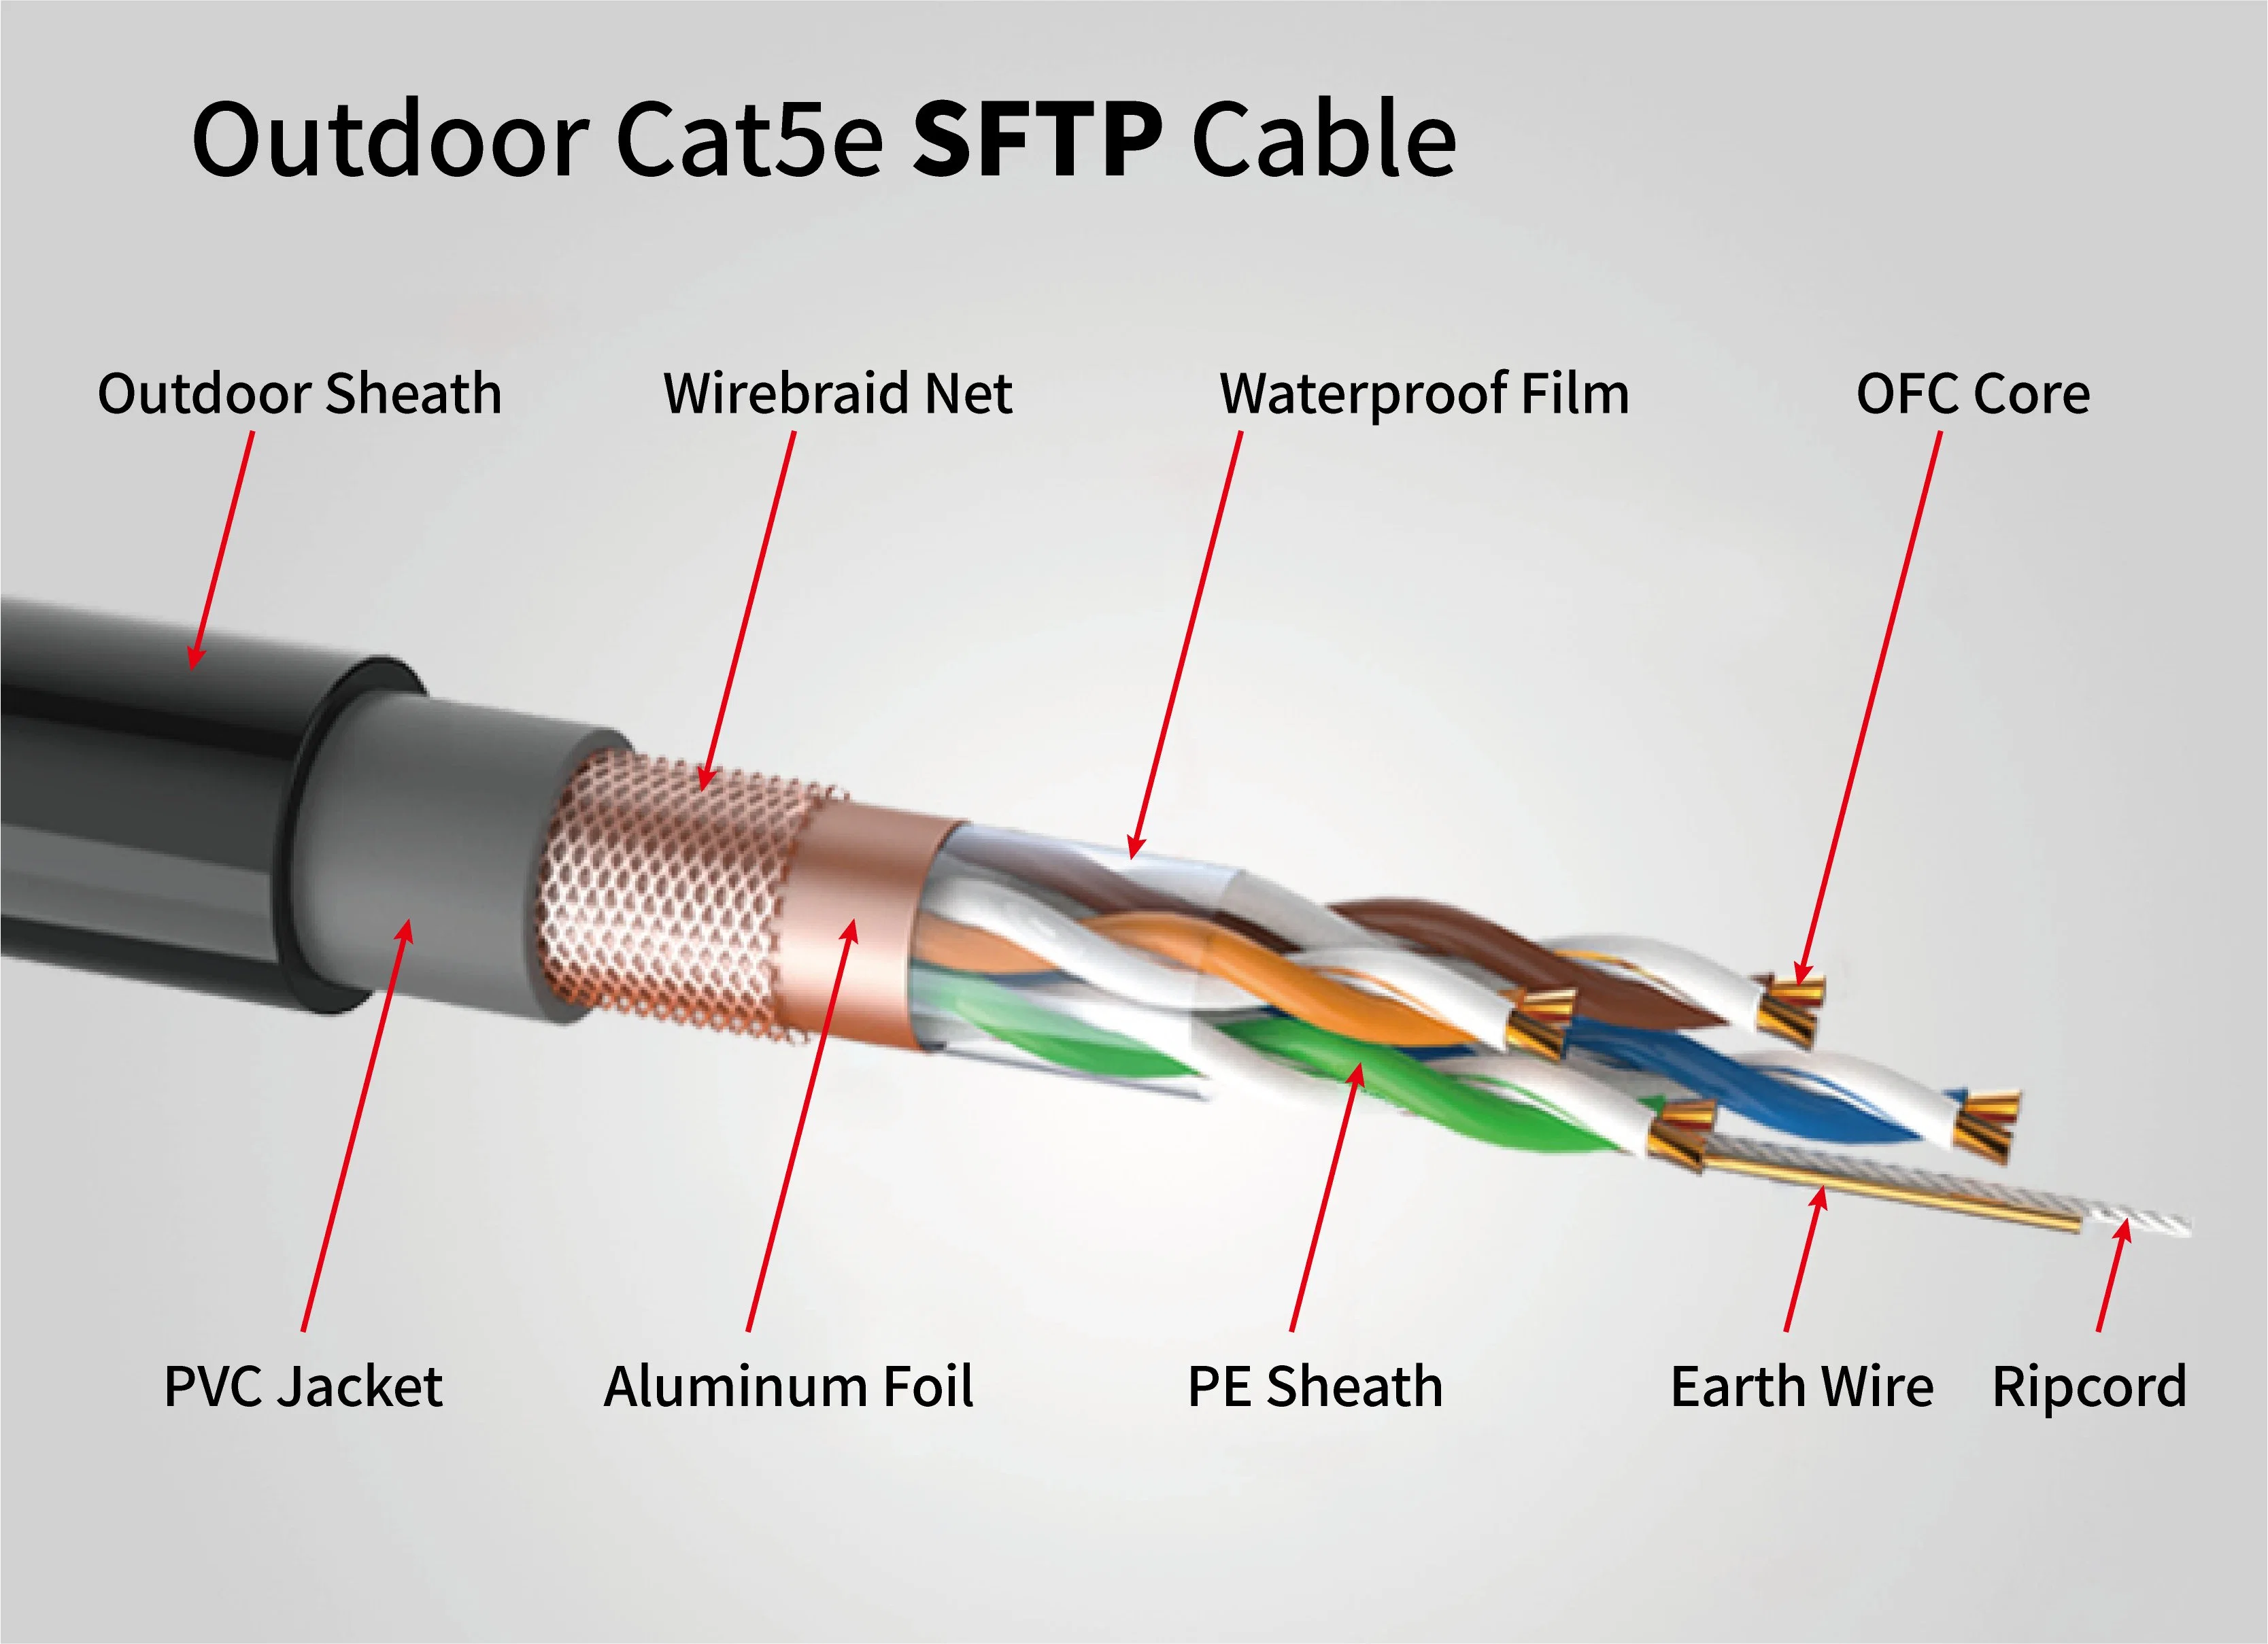 Outdoor 1000FT RJ45 Connector Cat5e 24AWG Shielded Cable SFTP Network Cable Cat5e LAN Cable with Copper Wire